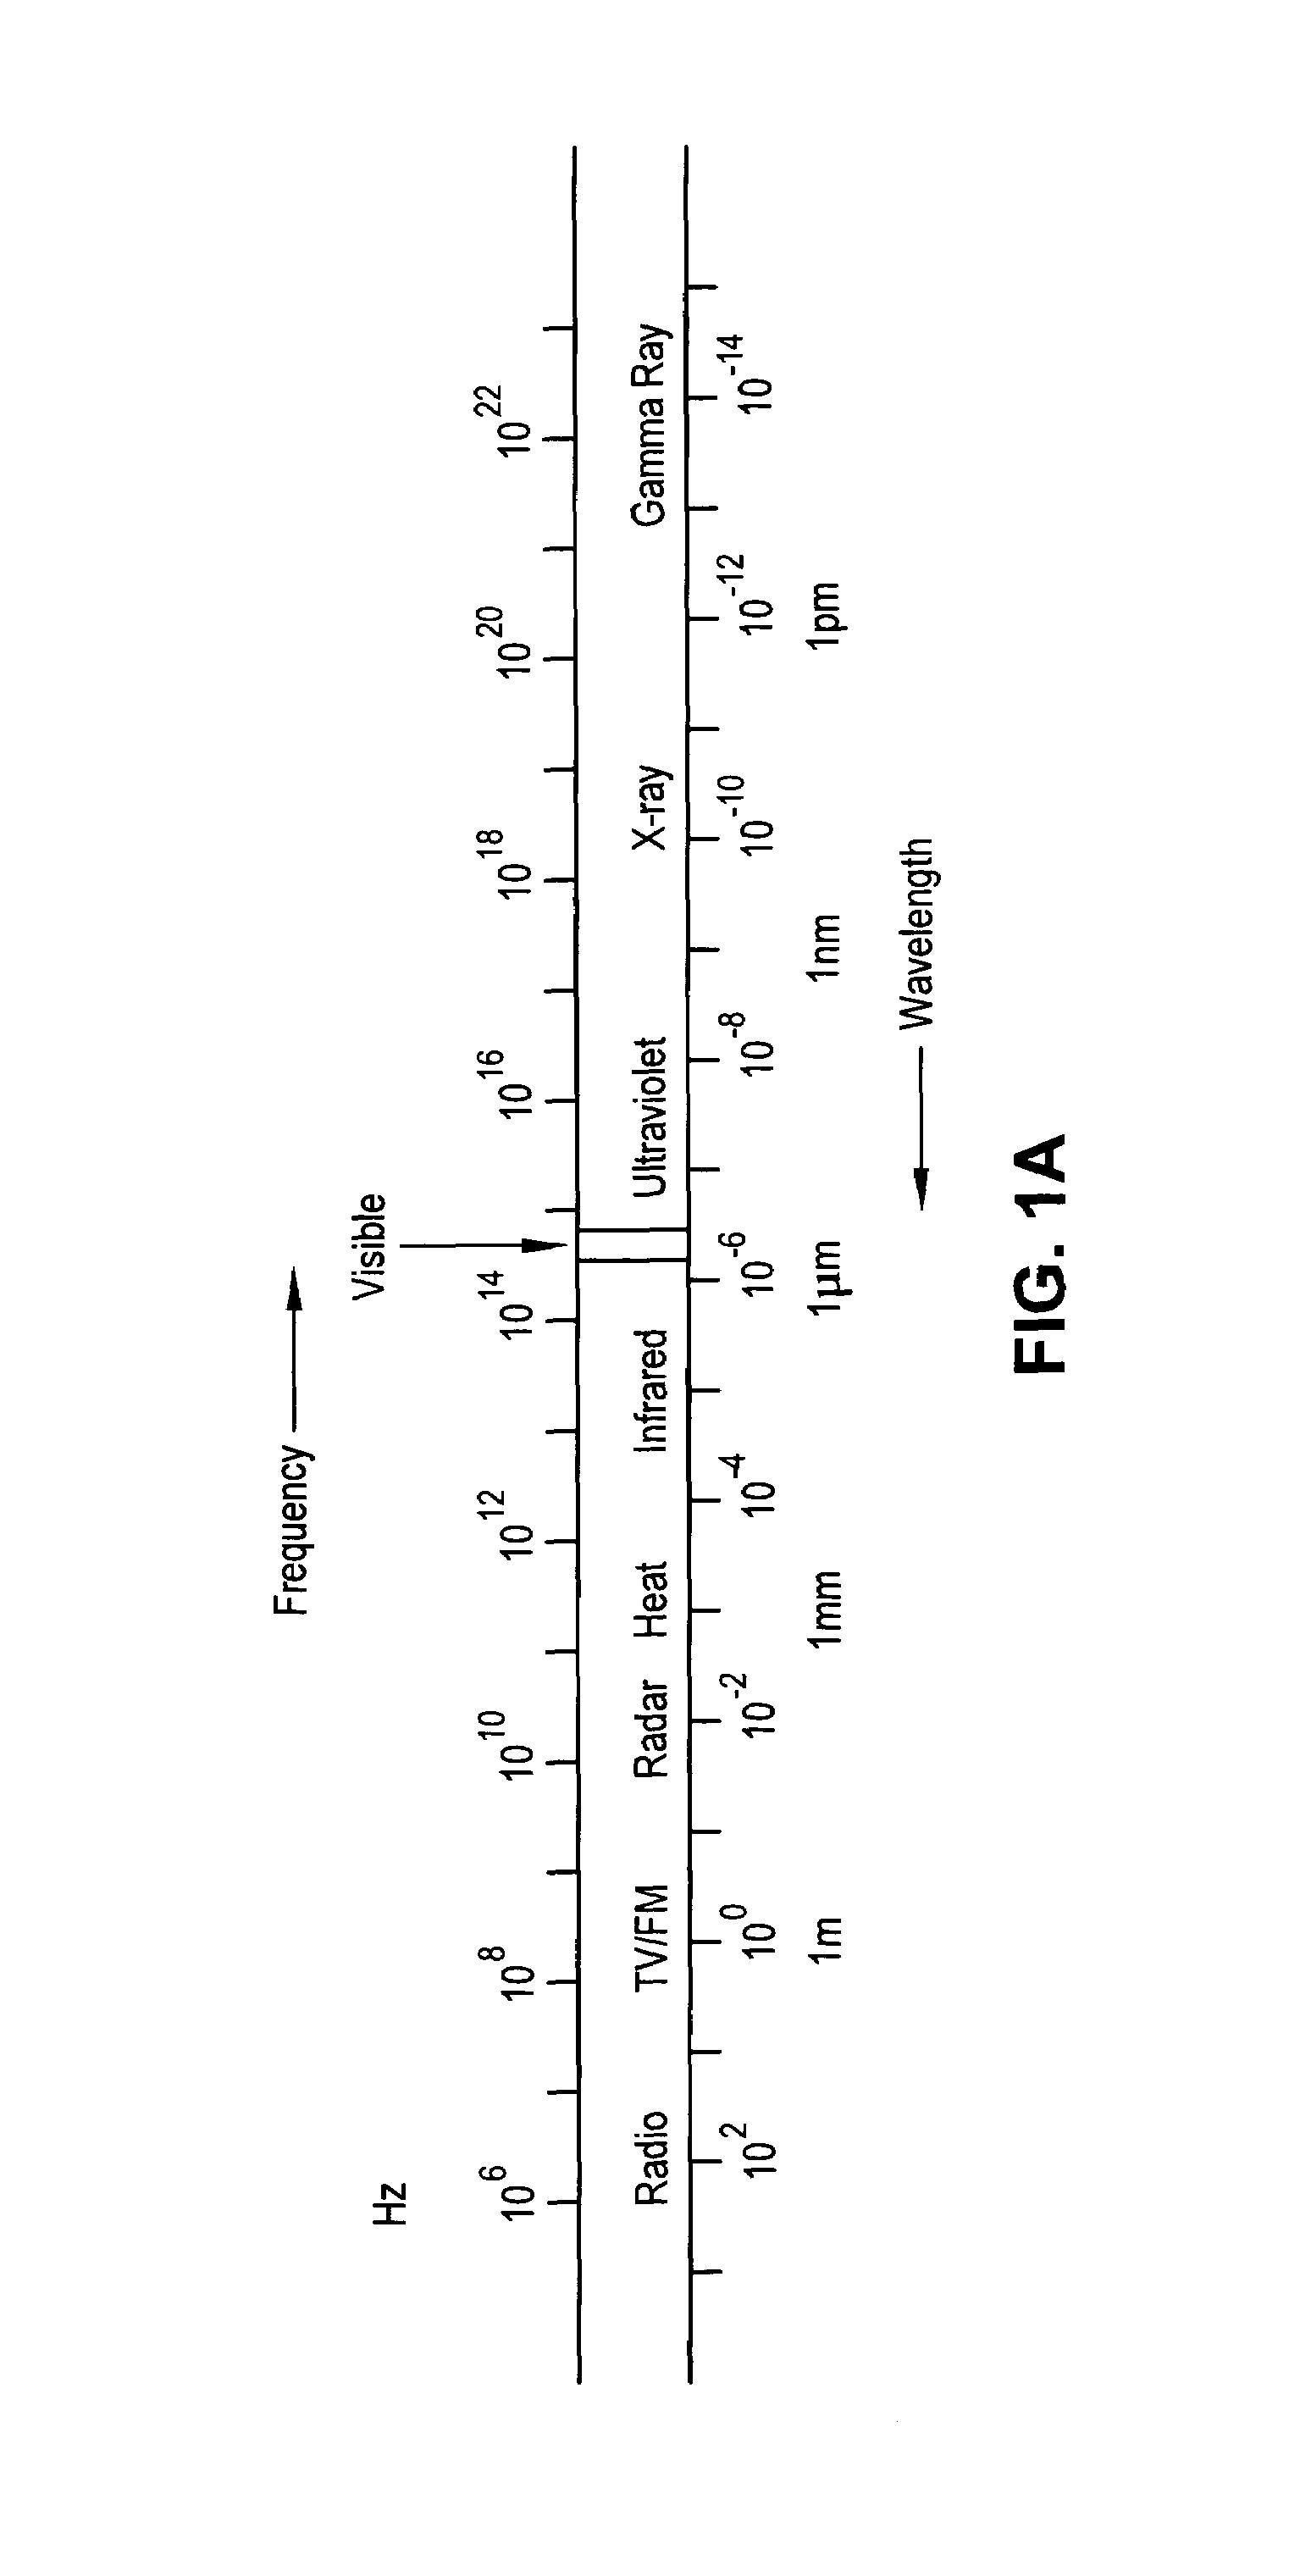 Apparatus and method for improved analysis of liquids by continuous wave-cavity ring down spectroscopy